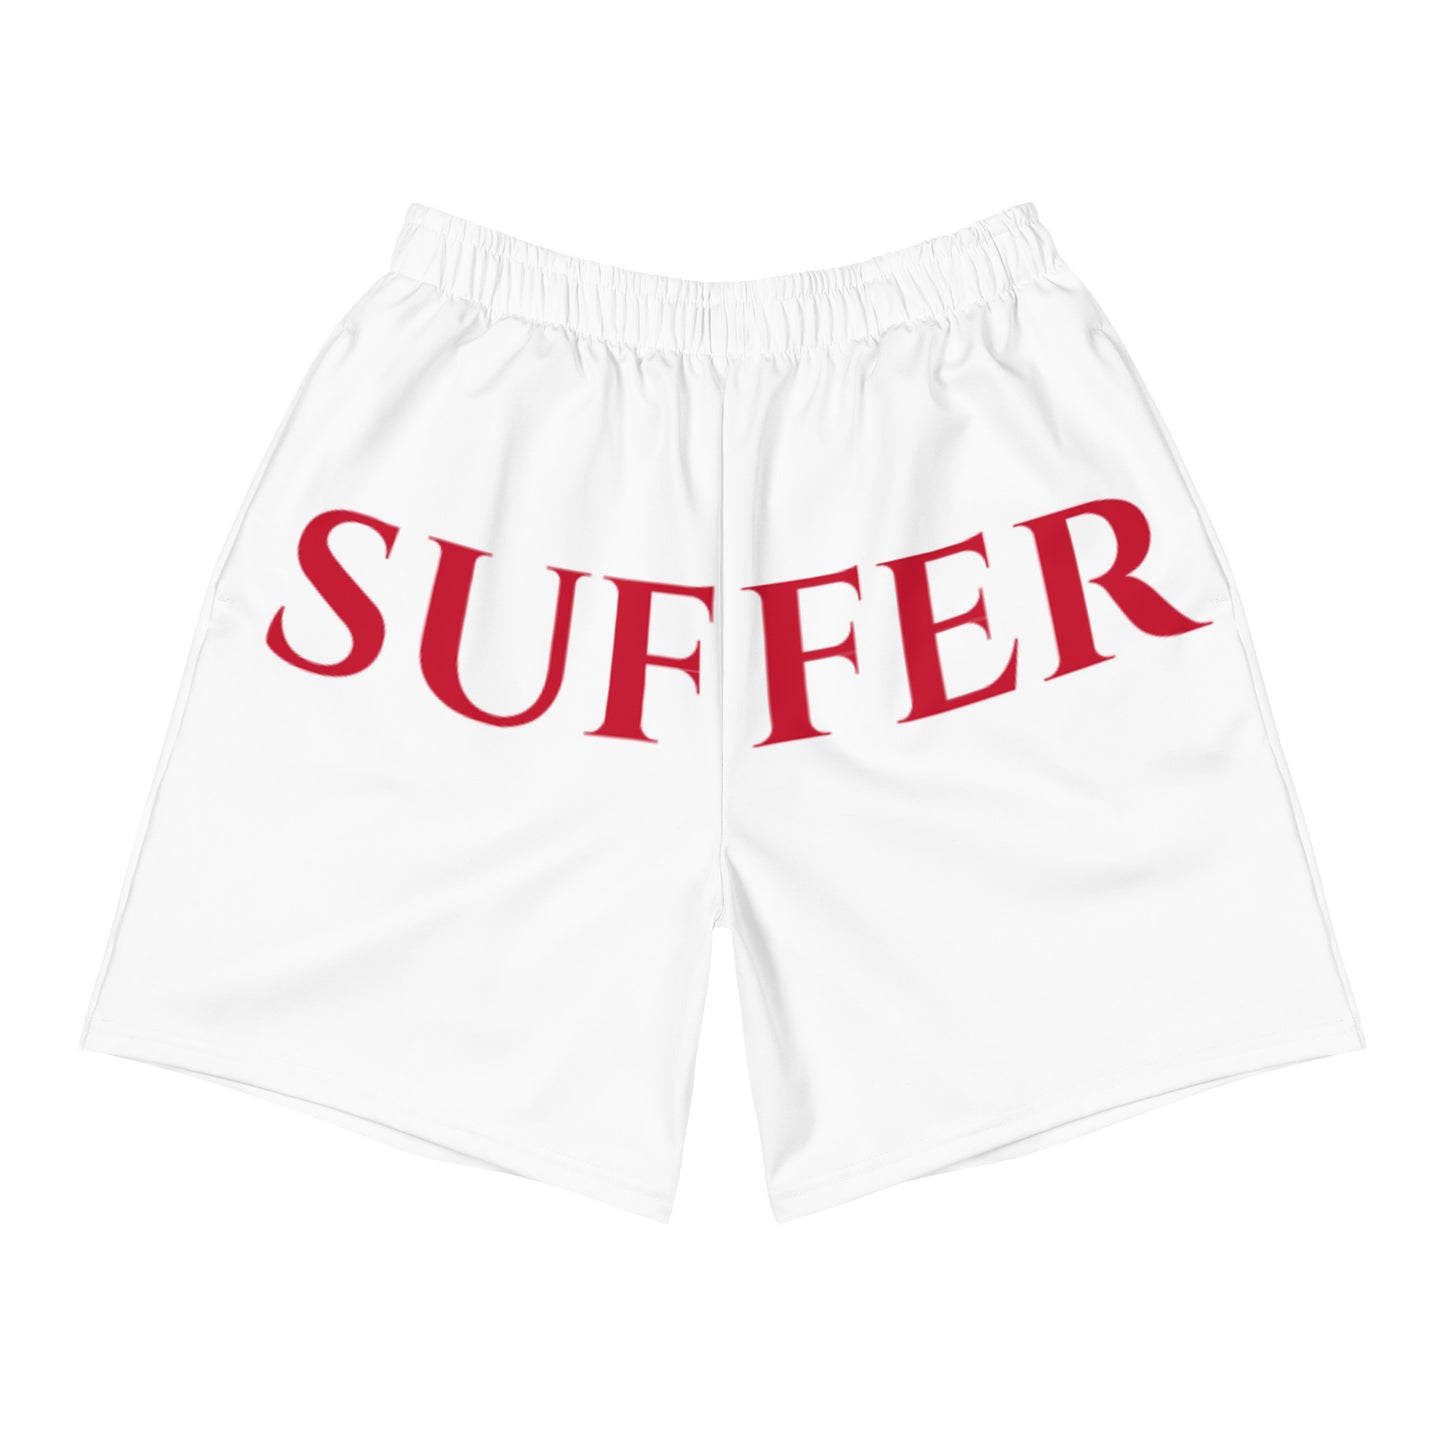 Wht/Red Hip Suffer Athletic Shorts